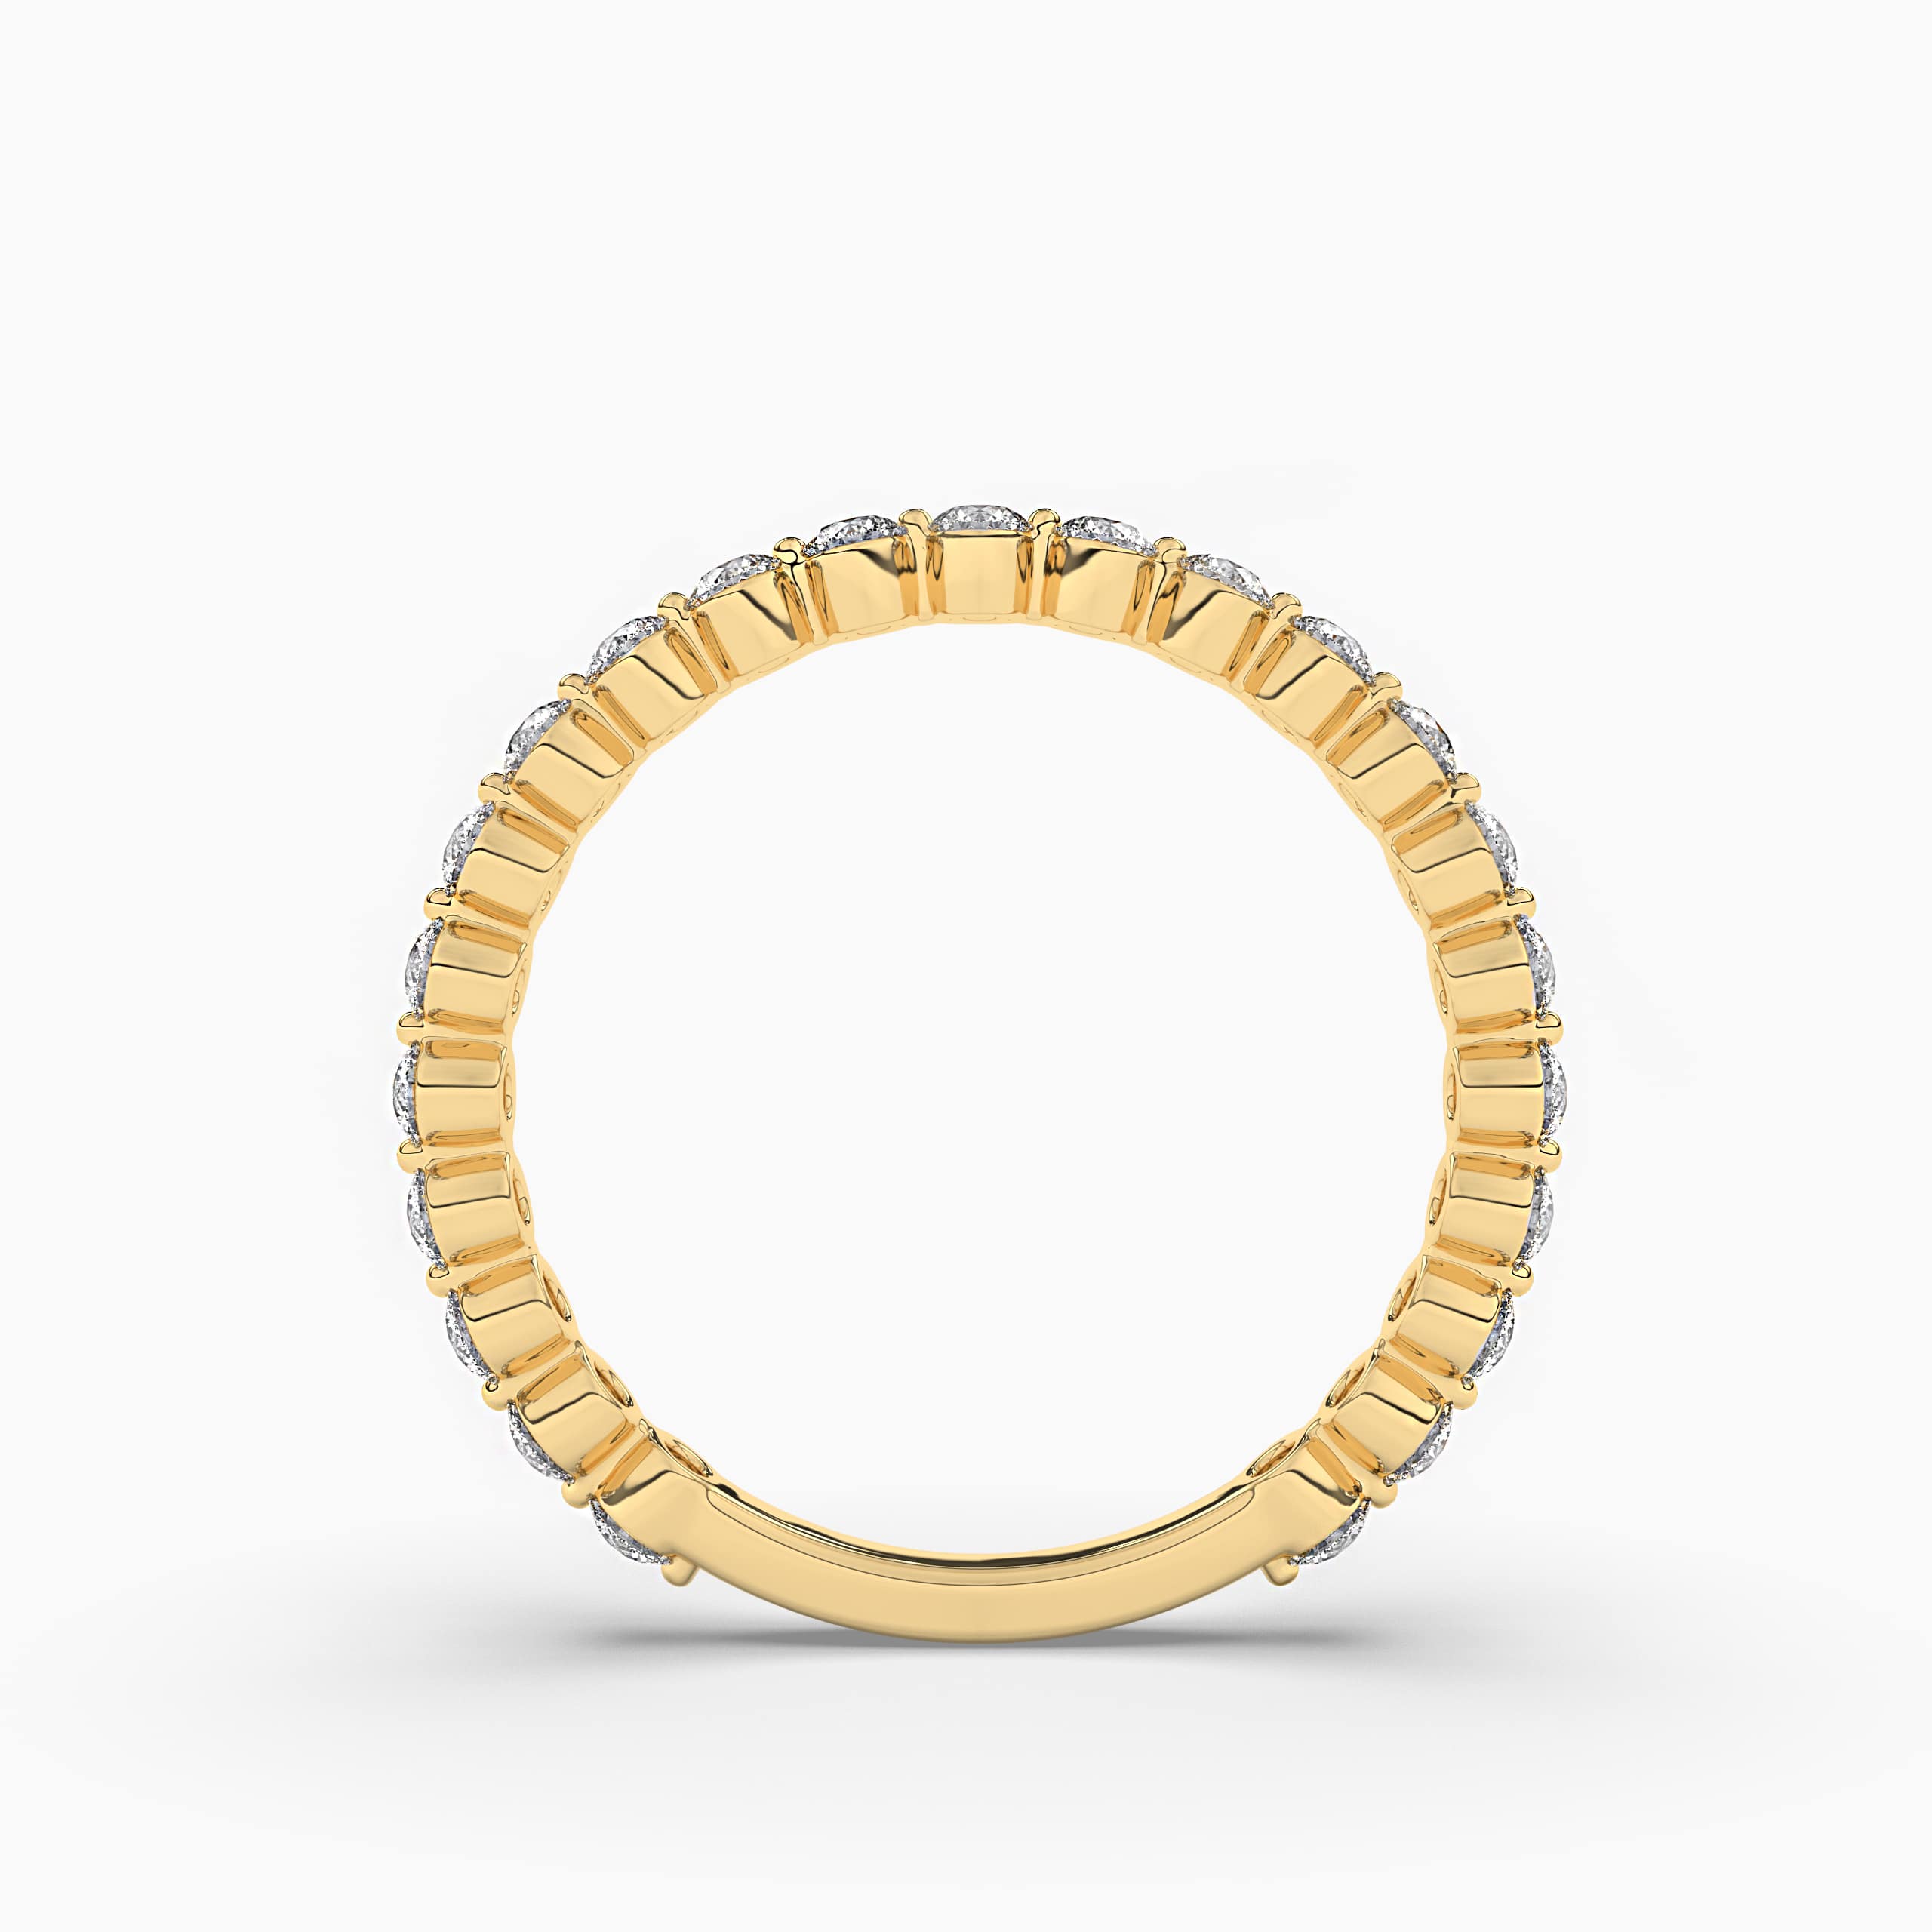 Blue Sapphire Eternity Wedding Band In Yellow Gold For Woman's Gift 